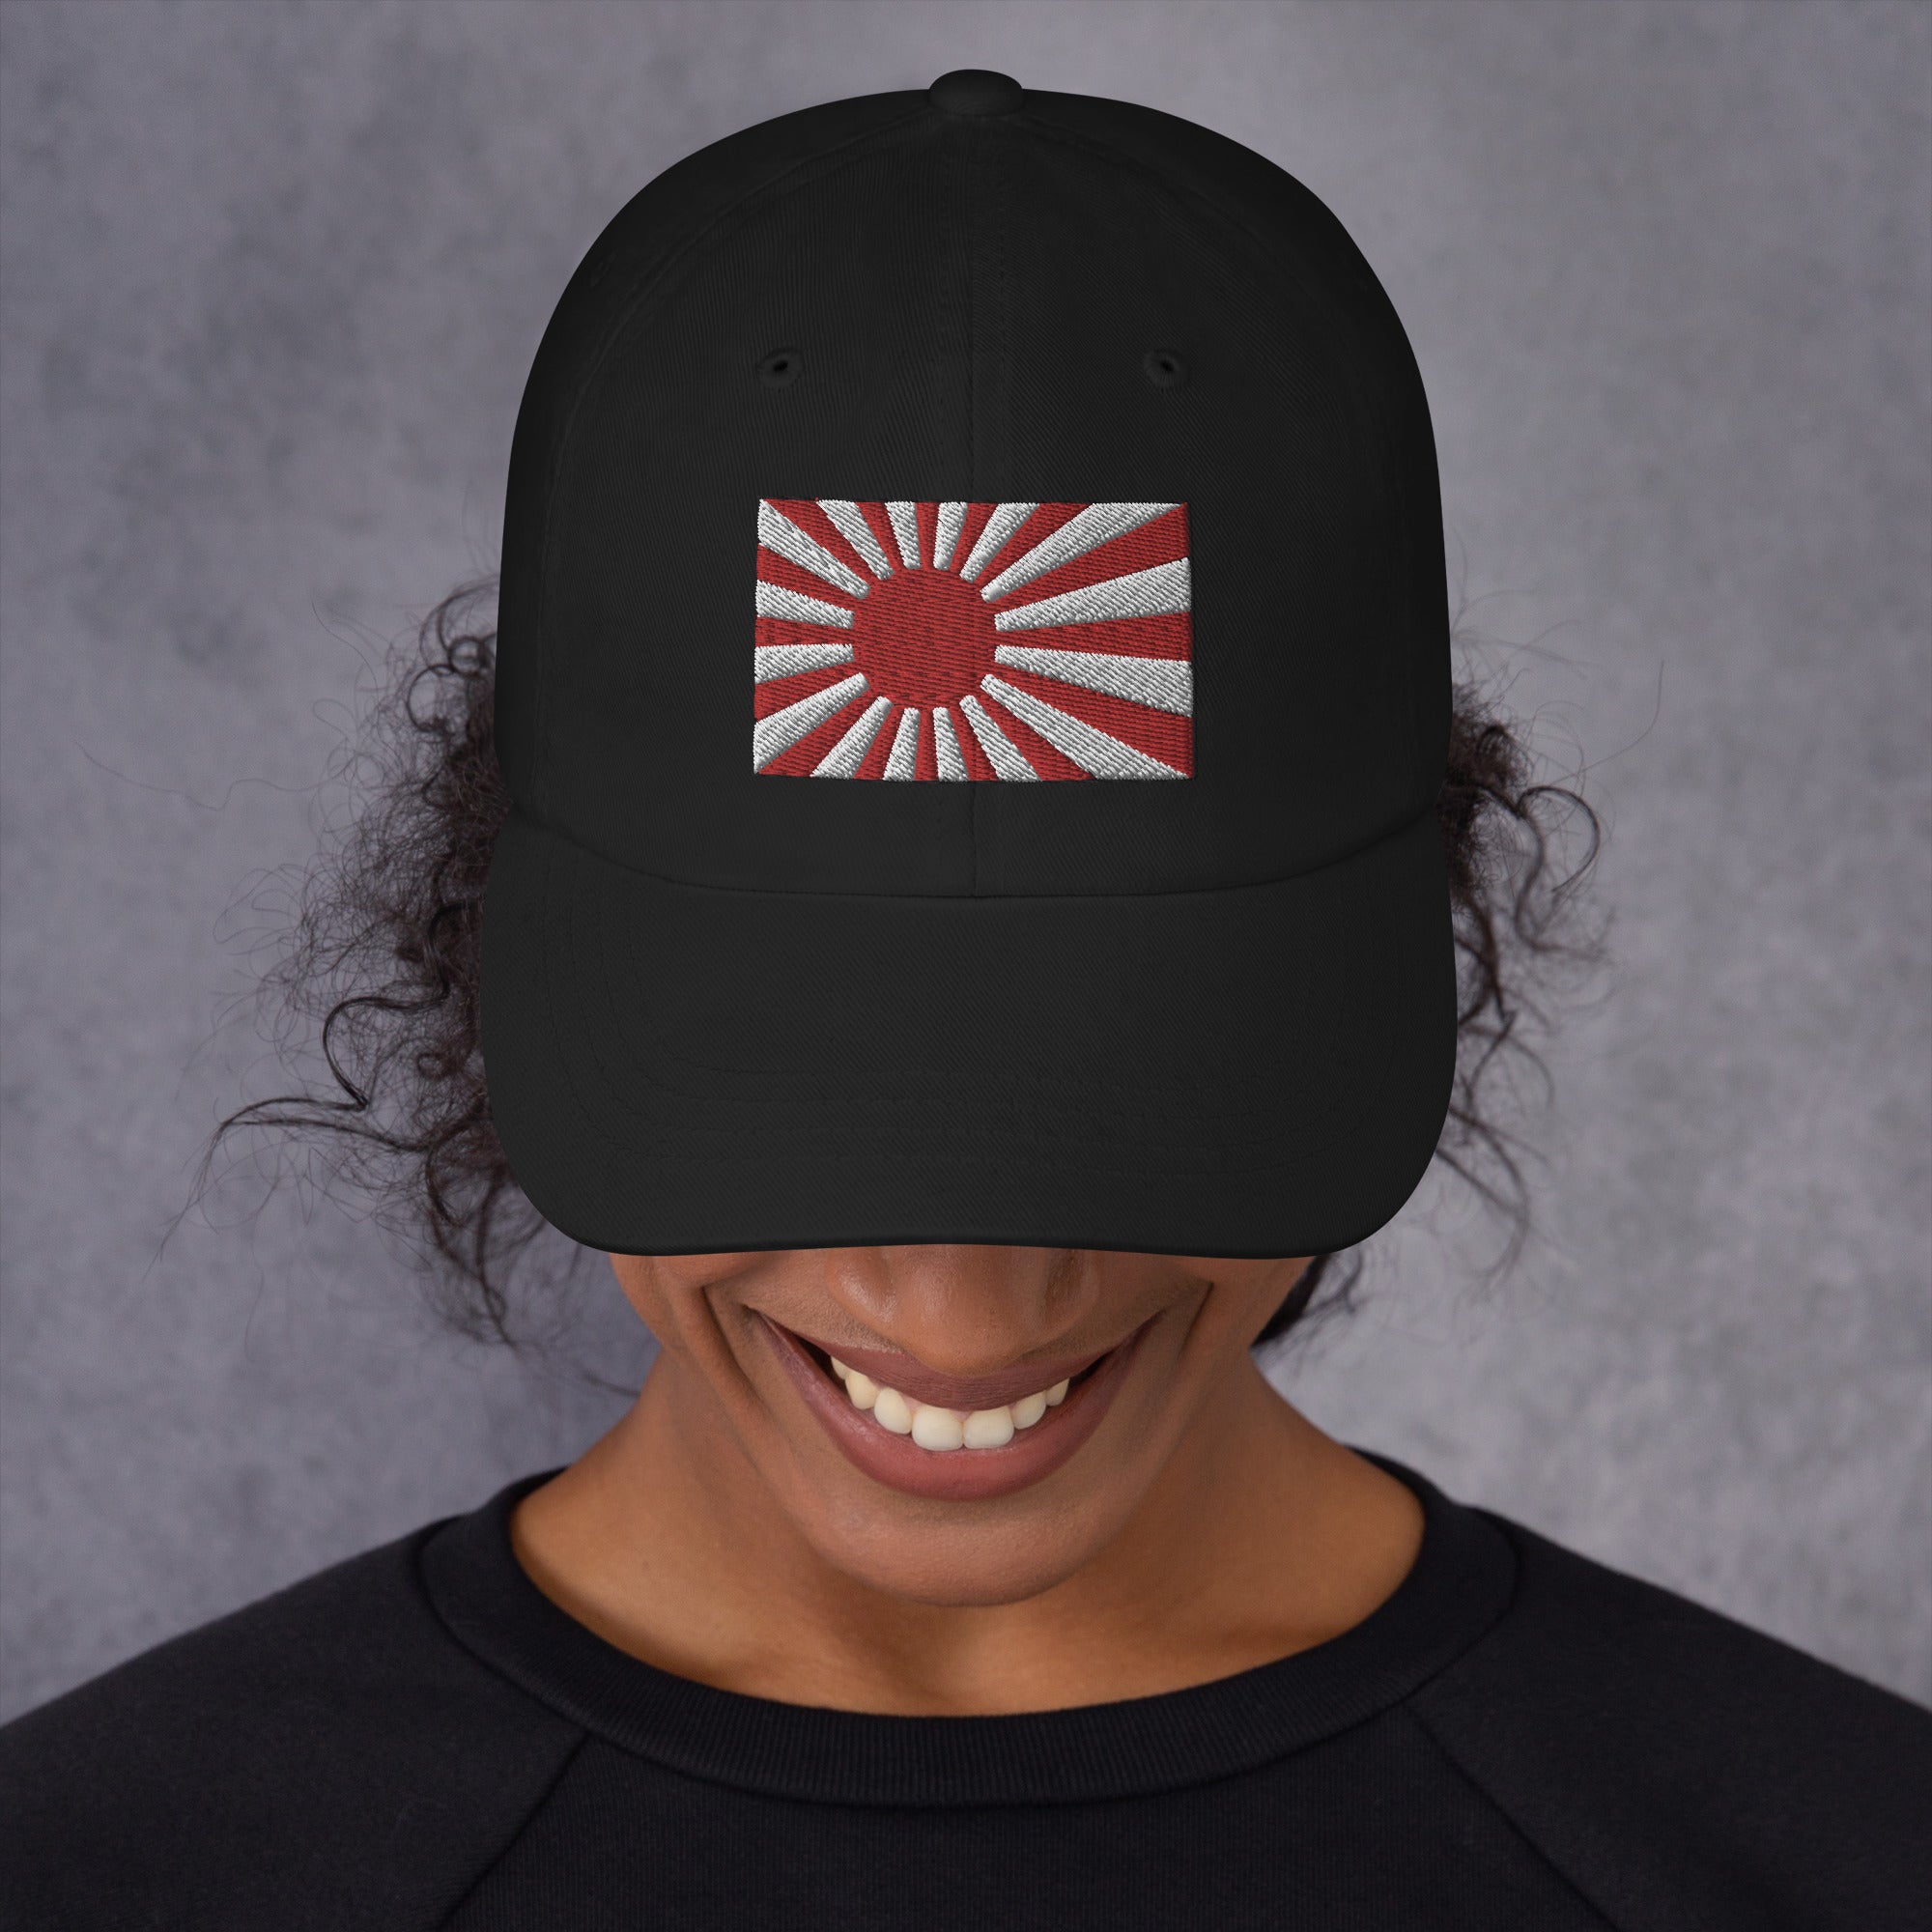 The National Flag of Japan Embroidered Baseball Cap Land of the Rising Sun Dad hat - Edge of Life Designs